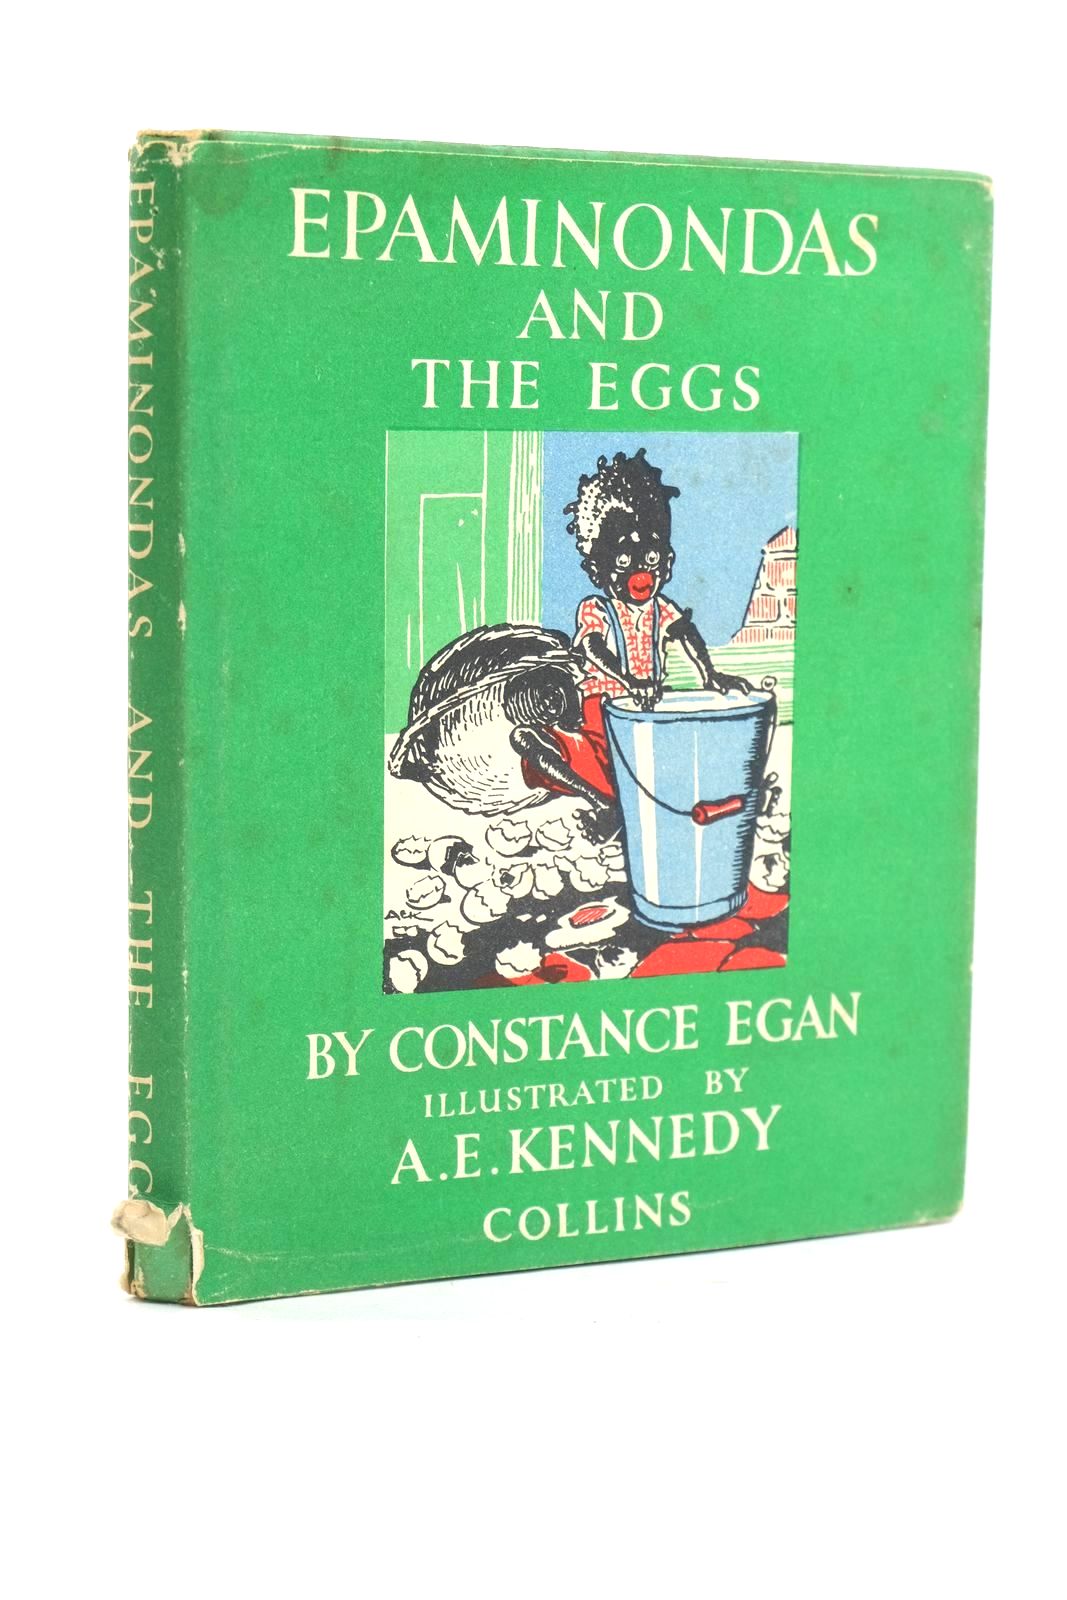 Photo of EPAMINONDAS AND THE EGGS written by Egan, Constance illustrated by Kennedy, A.E. published by Collins (STOCK CODE: 1320097)  for sale by Stella & Rose's Books